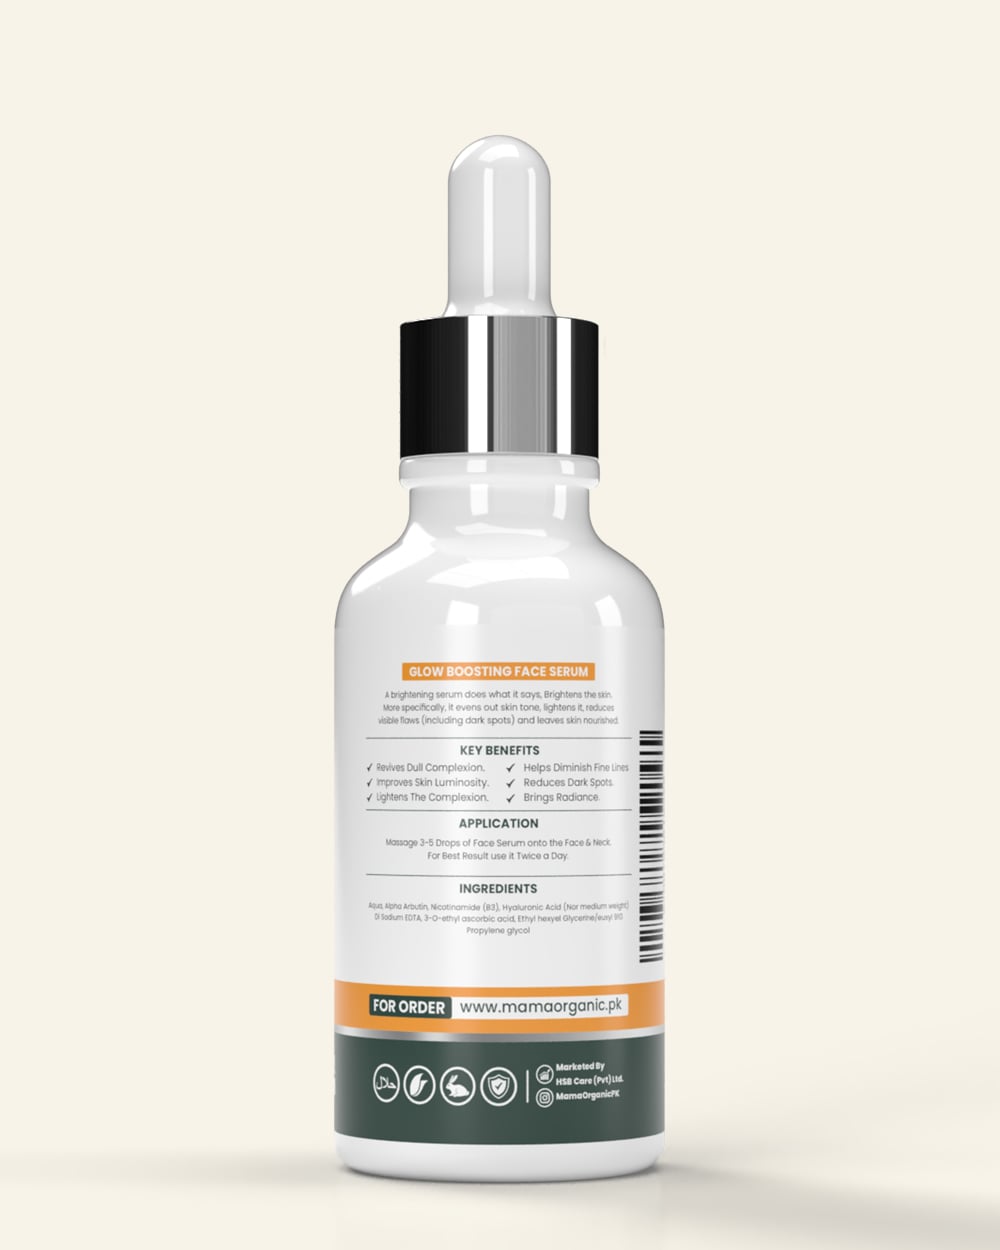 Glow Boosting Face Serum For Brighten & Fair Skin With Niacinamide & Ginger Extract - 30ml